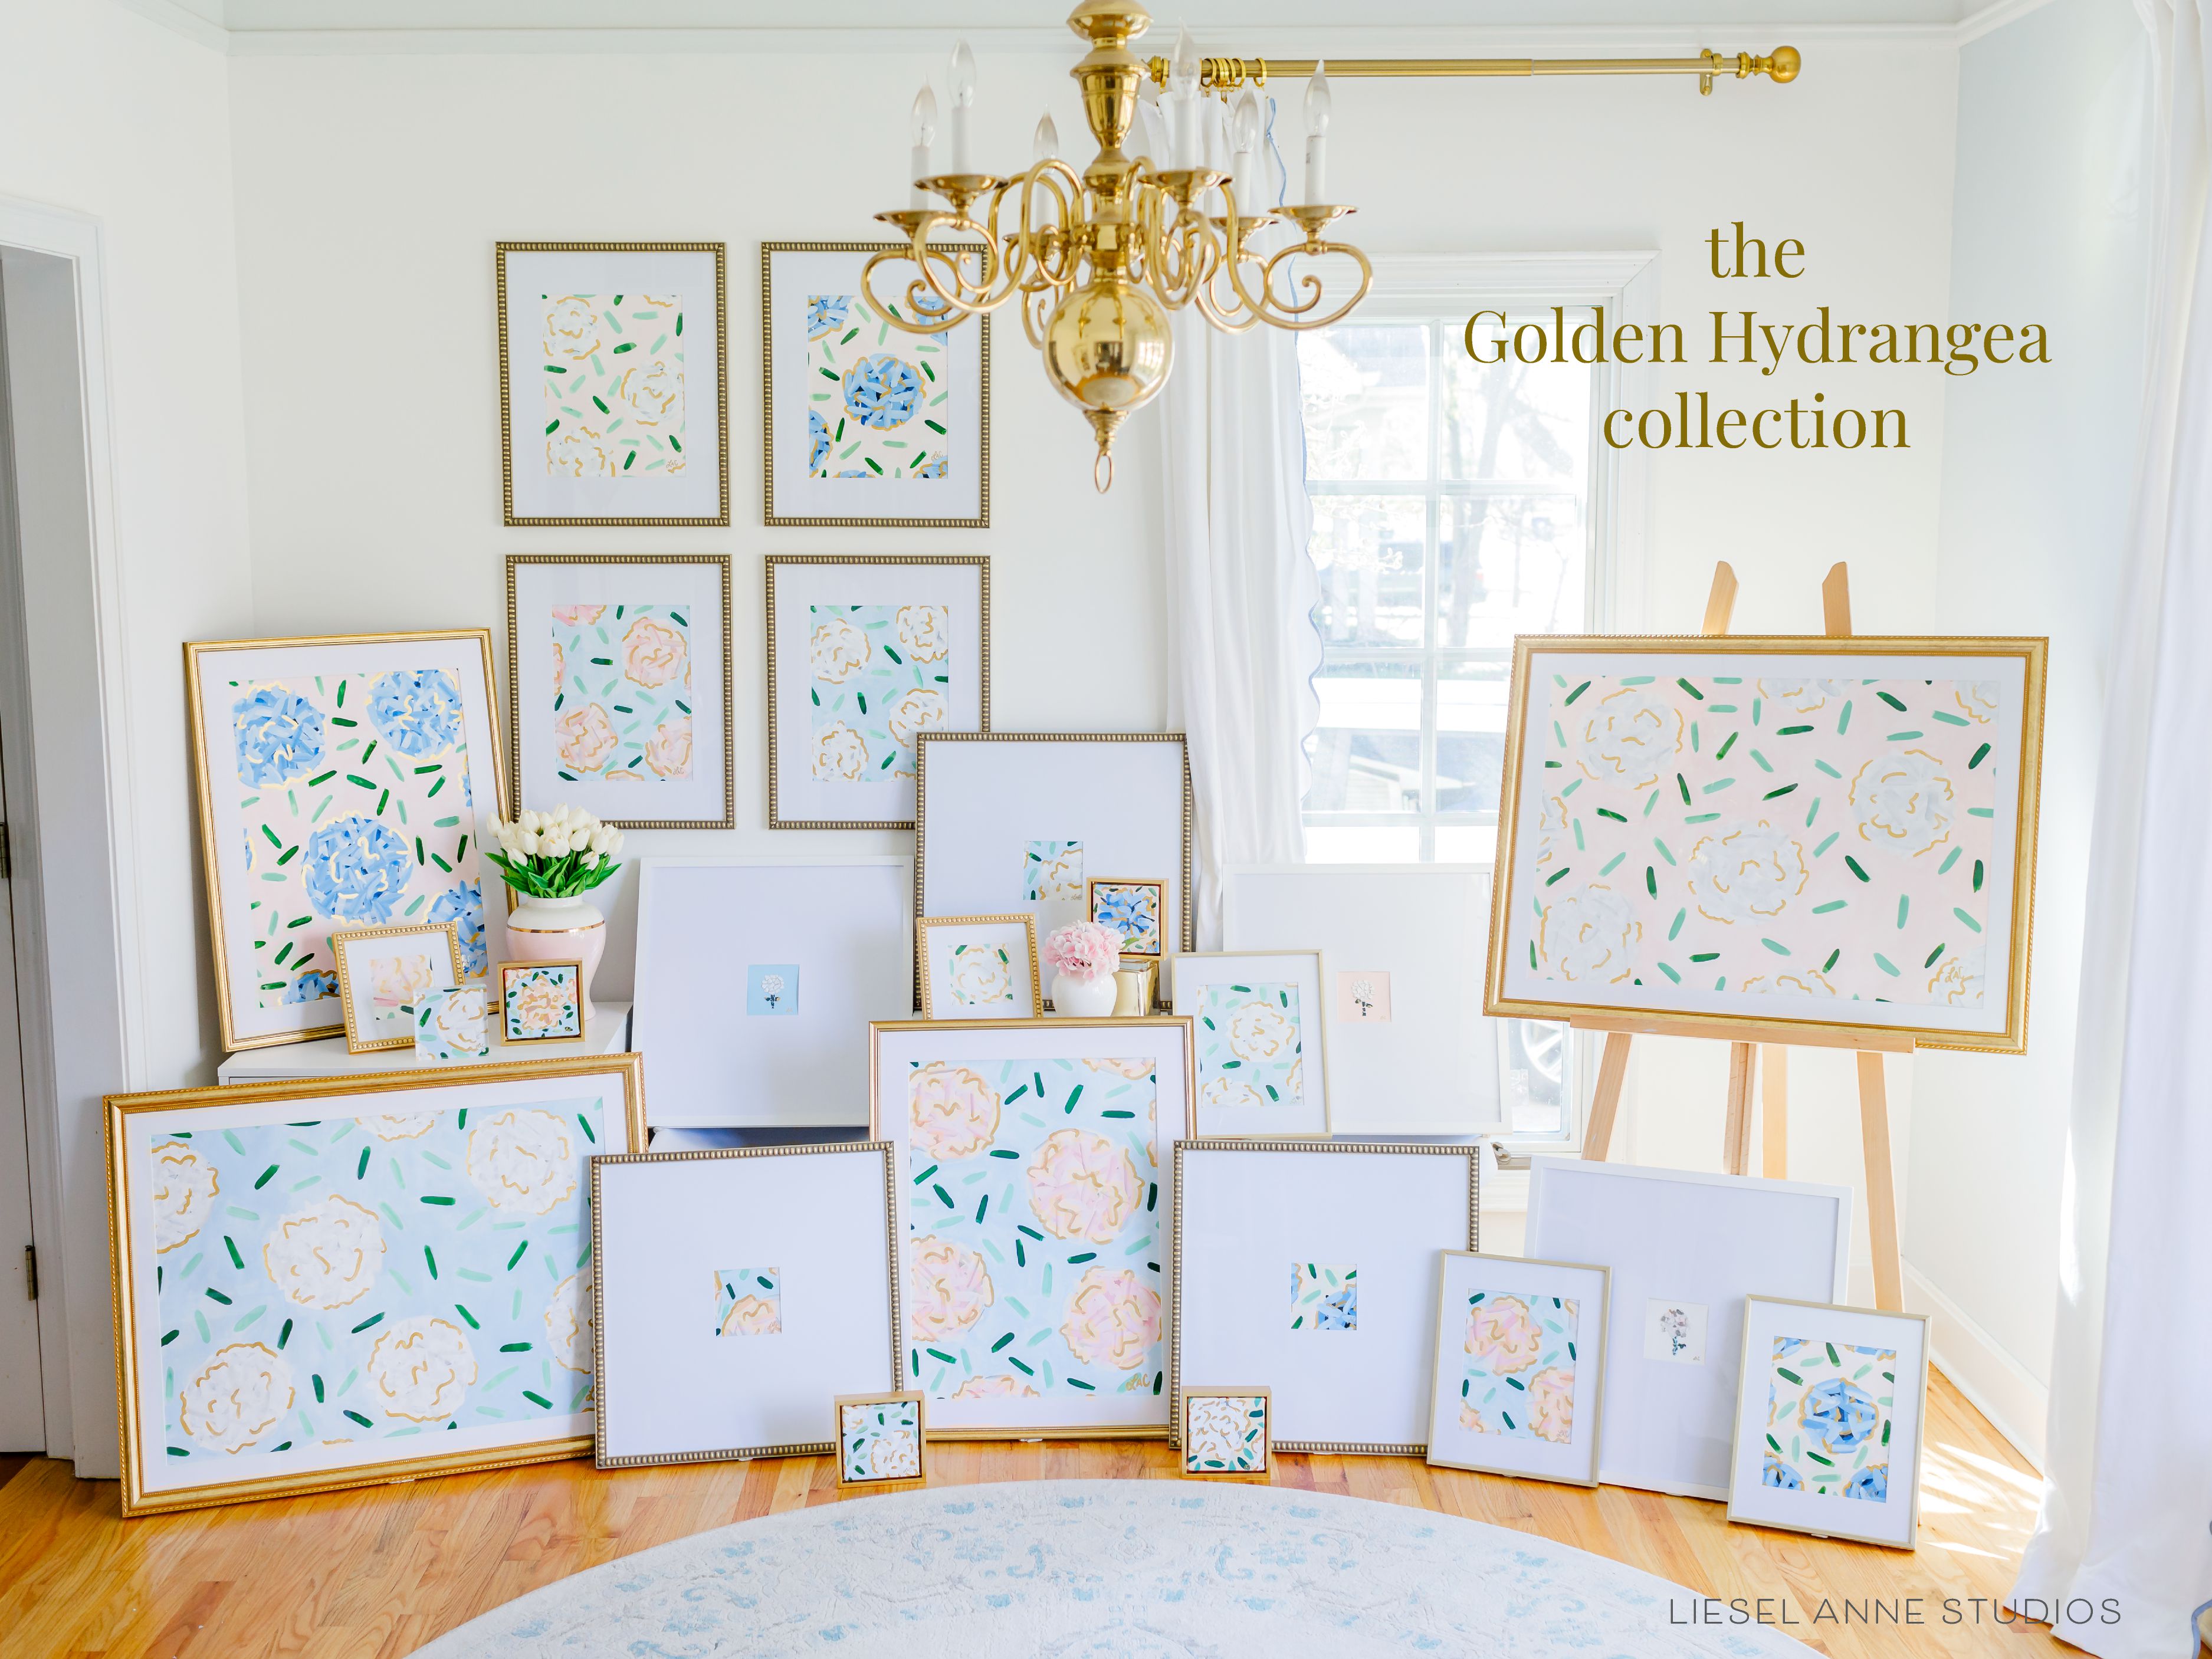 Golden Hydrangea Mini | Blue & White XV-Original artwork measures 5"x5" | Framed in gold wood floater frame | Hand-Painted with gouache on stretched canvas | Features our signature Golden Hydrangea design with a light blue base, white hydrangeas and shimmery gold accents | Initialed in gold by the Liesel Anne (the artist) on the front and signed and dated on the back-The Singing Little Bird